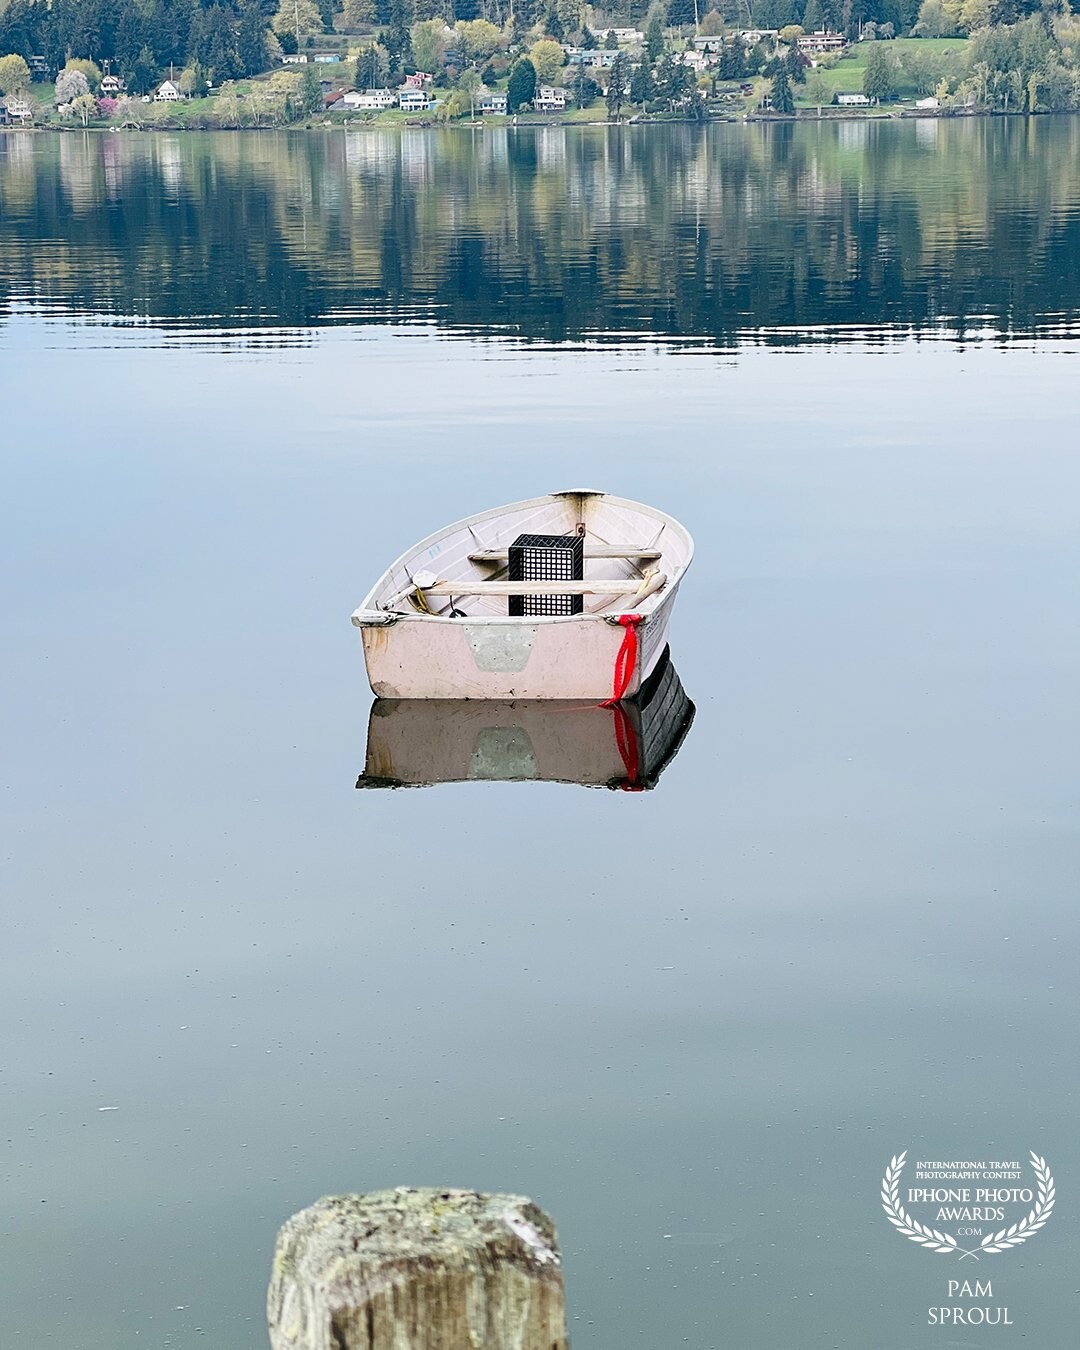 Walking along the seashore I came across this lovely dinghy floating on a glassy surface of the bay~ I was struck by the perfect mirror-like quality of the reflections around this small boat resting in Liberty Bay <br />
<br />
“Dinghy Reflections” -2022